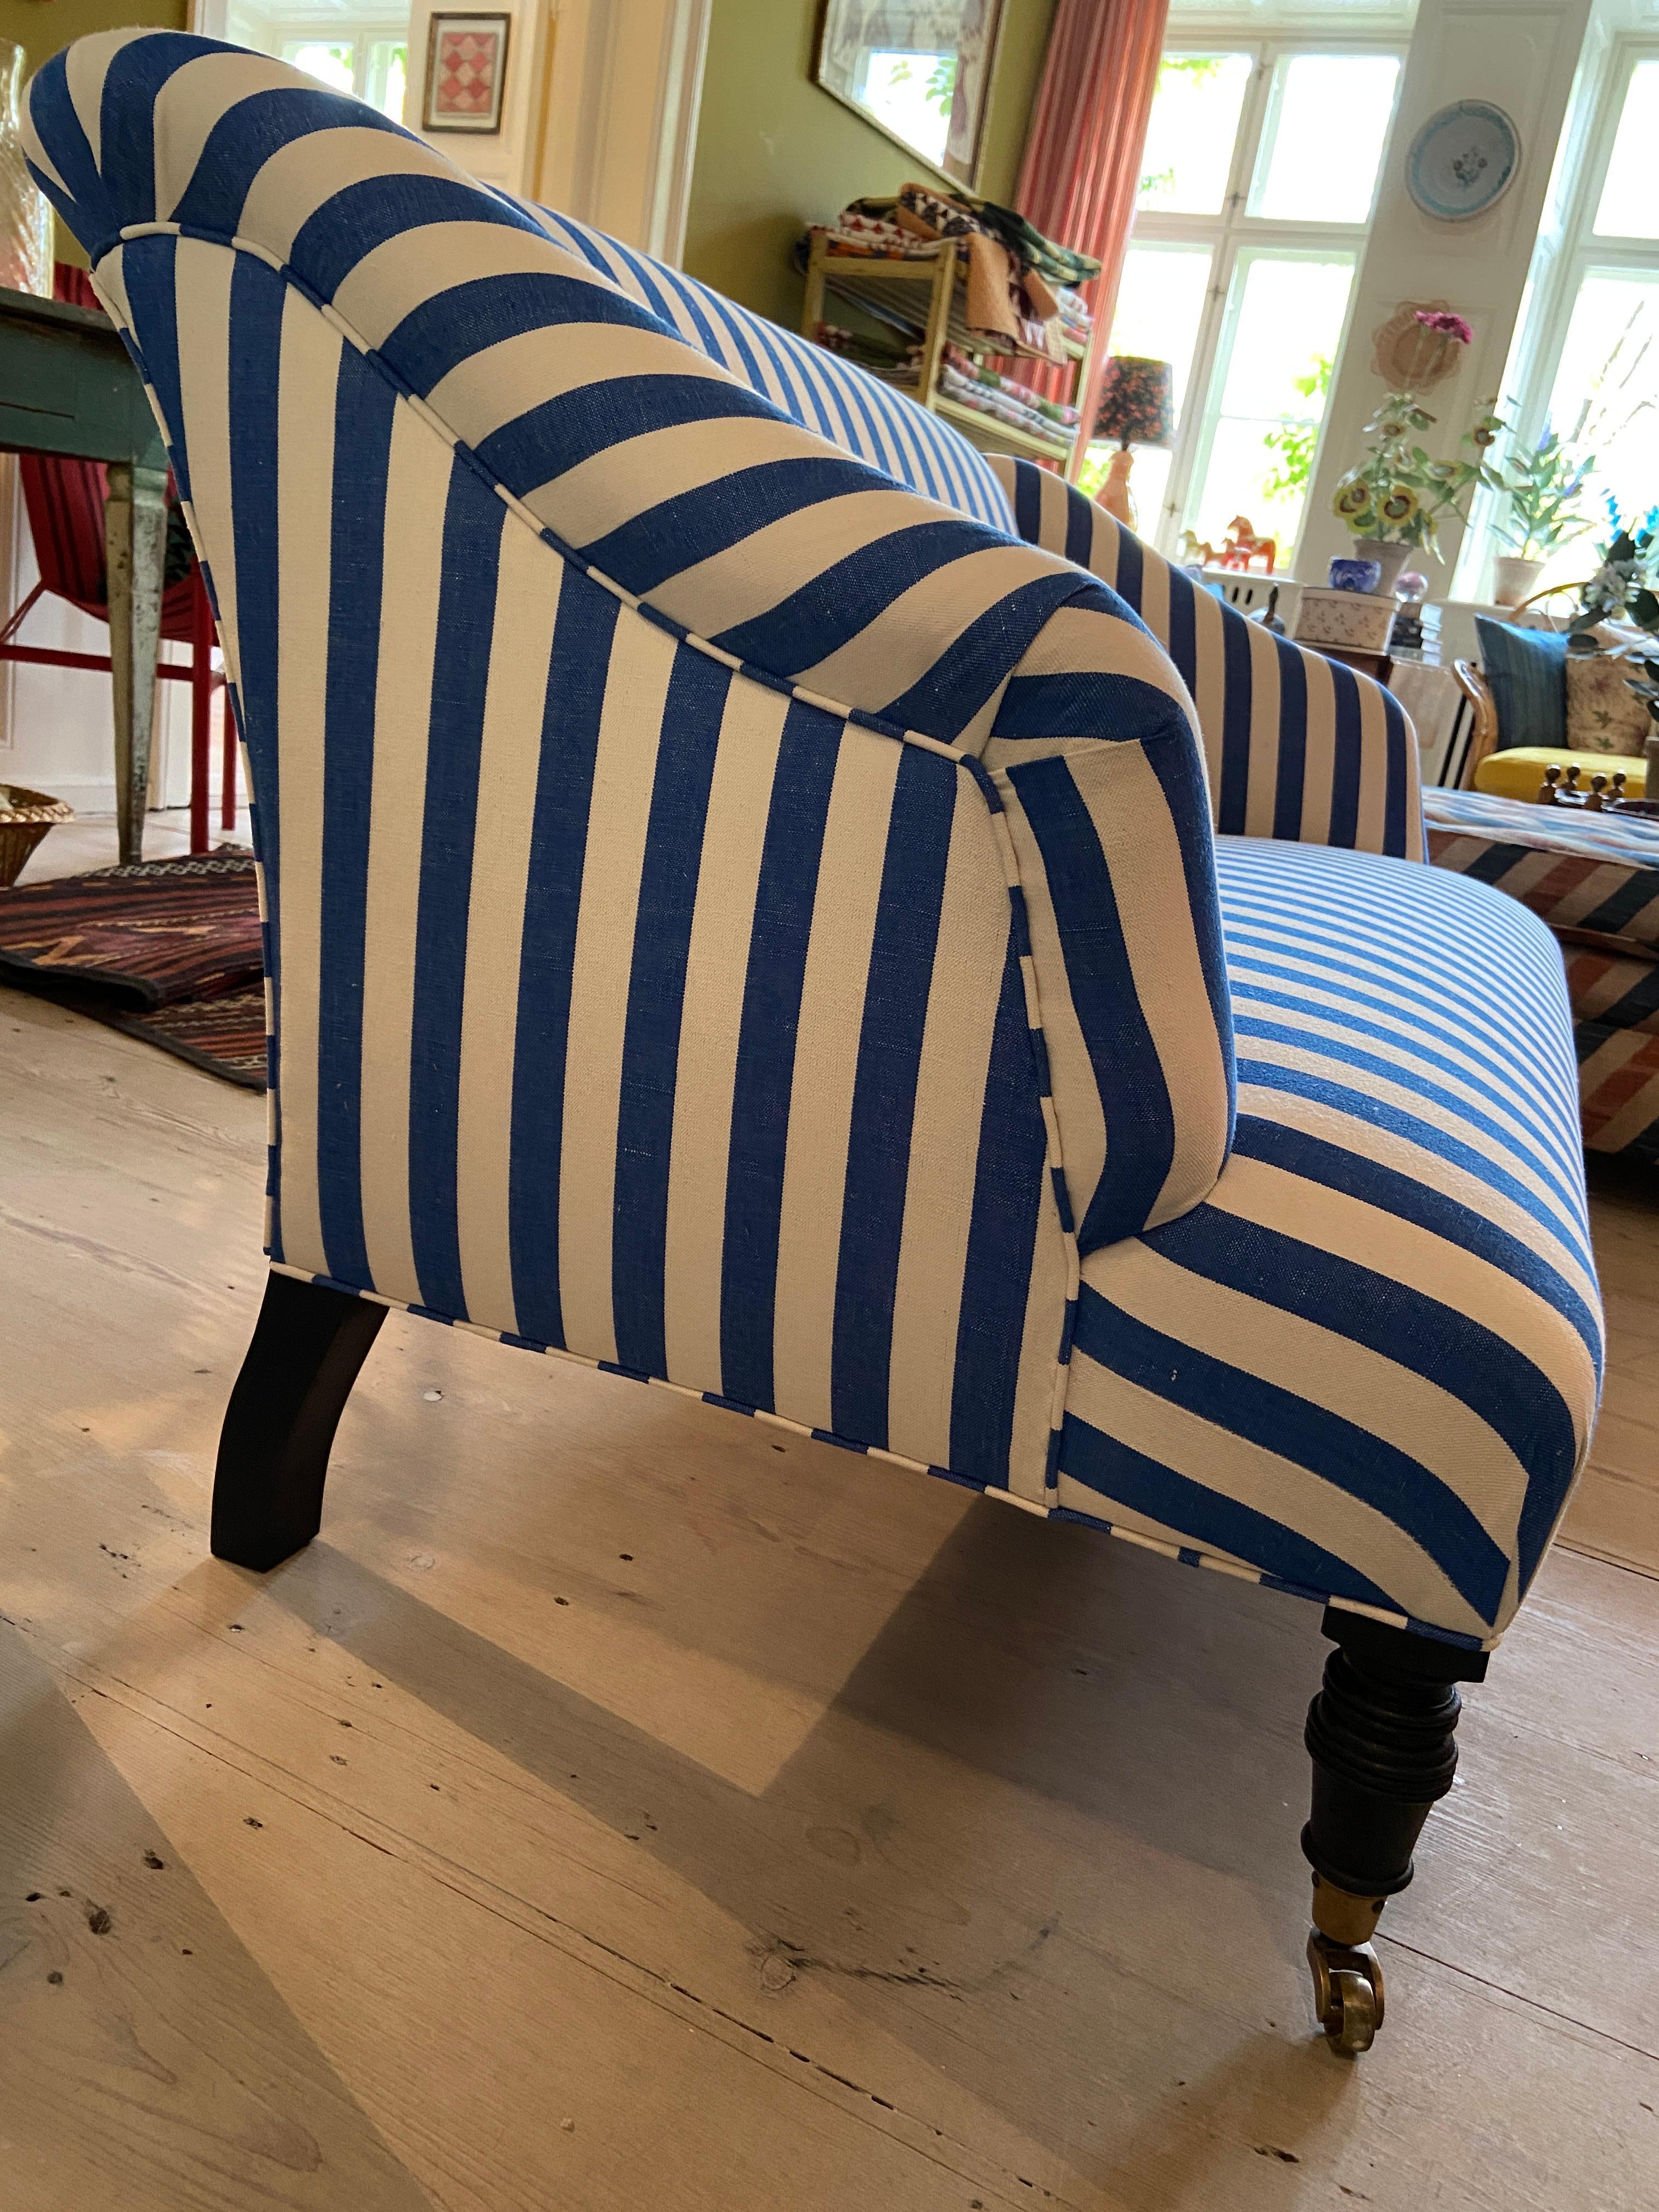 Contemporary Sofa in Customized Blue Striped Upholstery, Belgium, 2020s For Sale 1